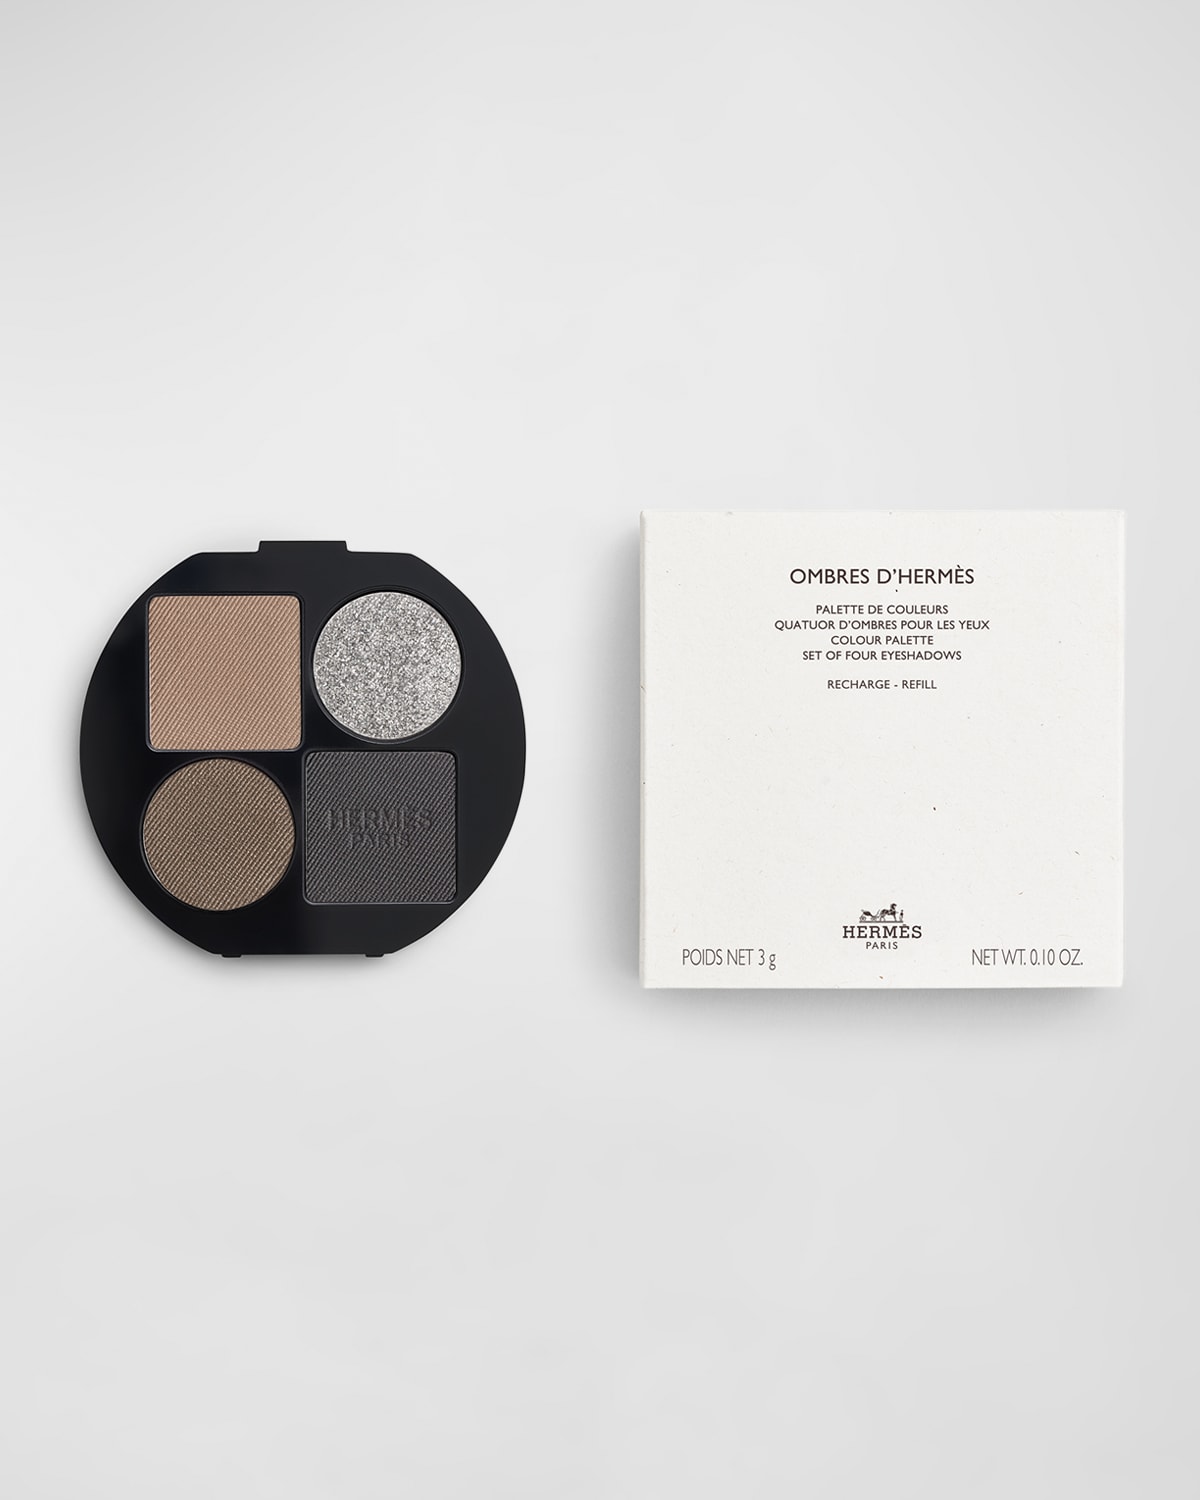 Ombres d'Hermes Eyeshadow Refill